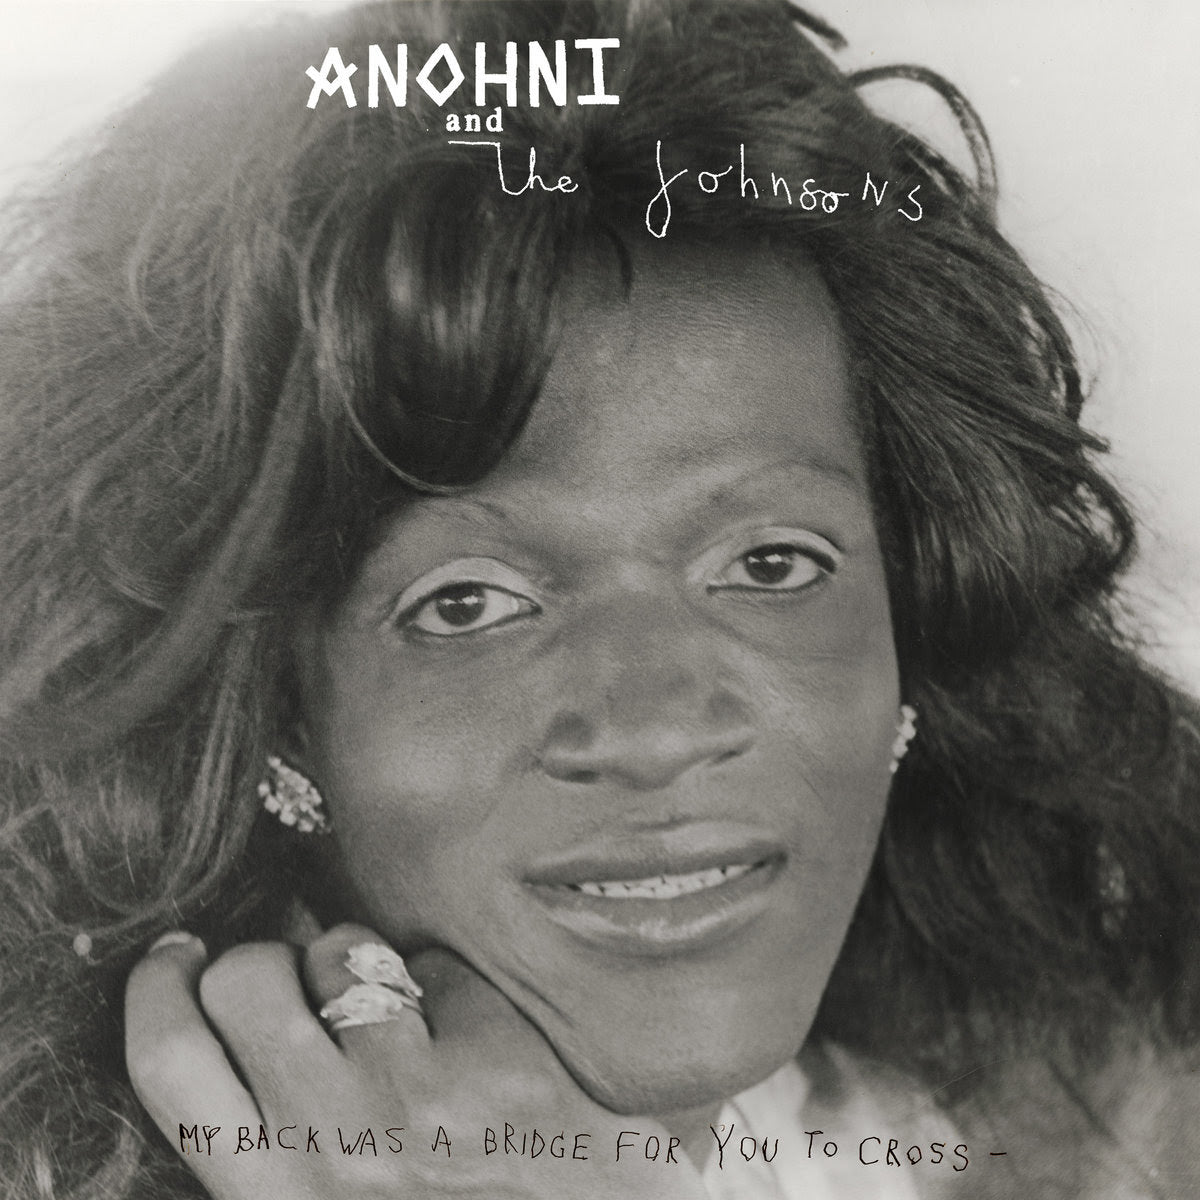 Anohni & the Johnsons - My Back Was A Bridge For You To Cross | Buy the Vinyl LP from Flying Nun Records